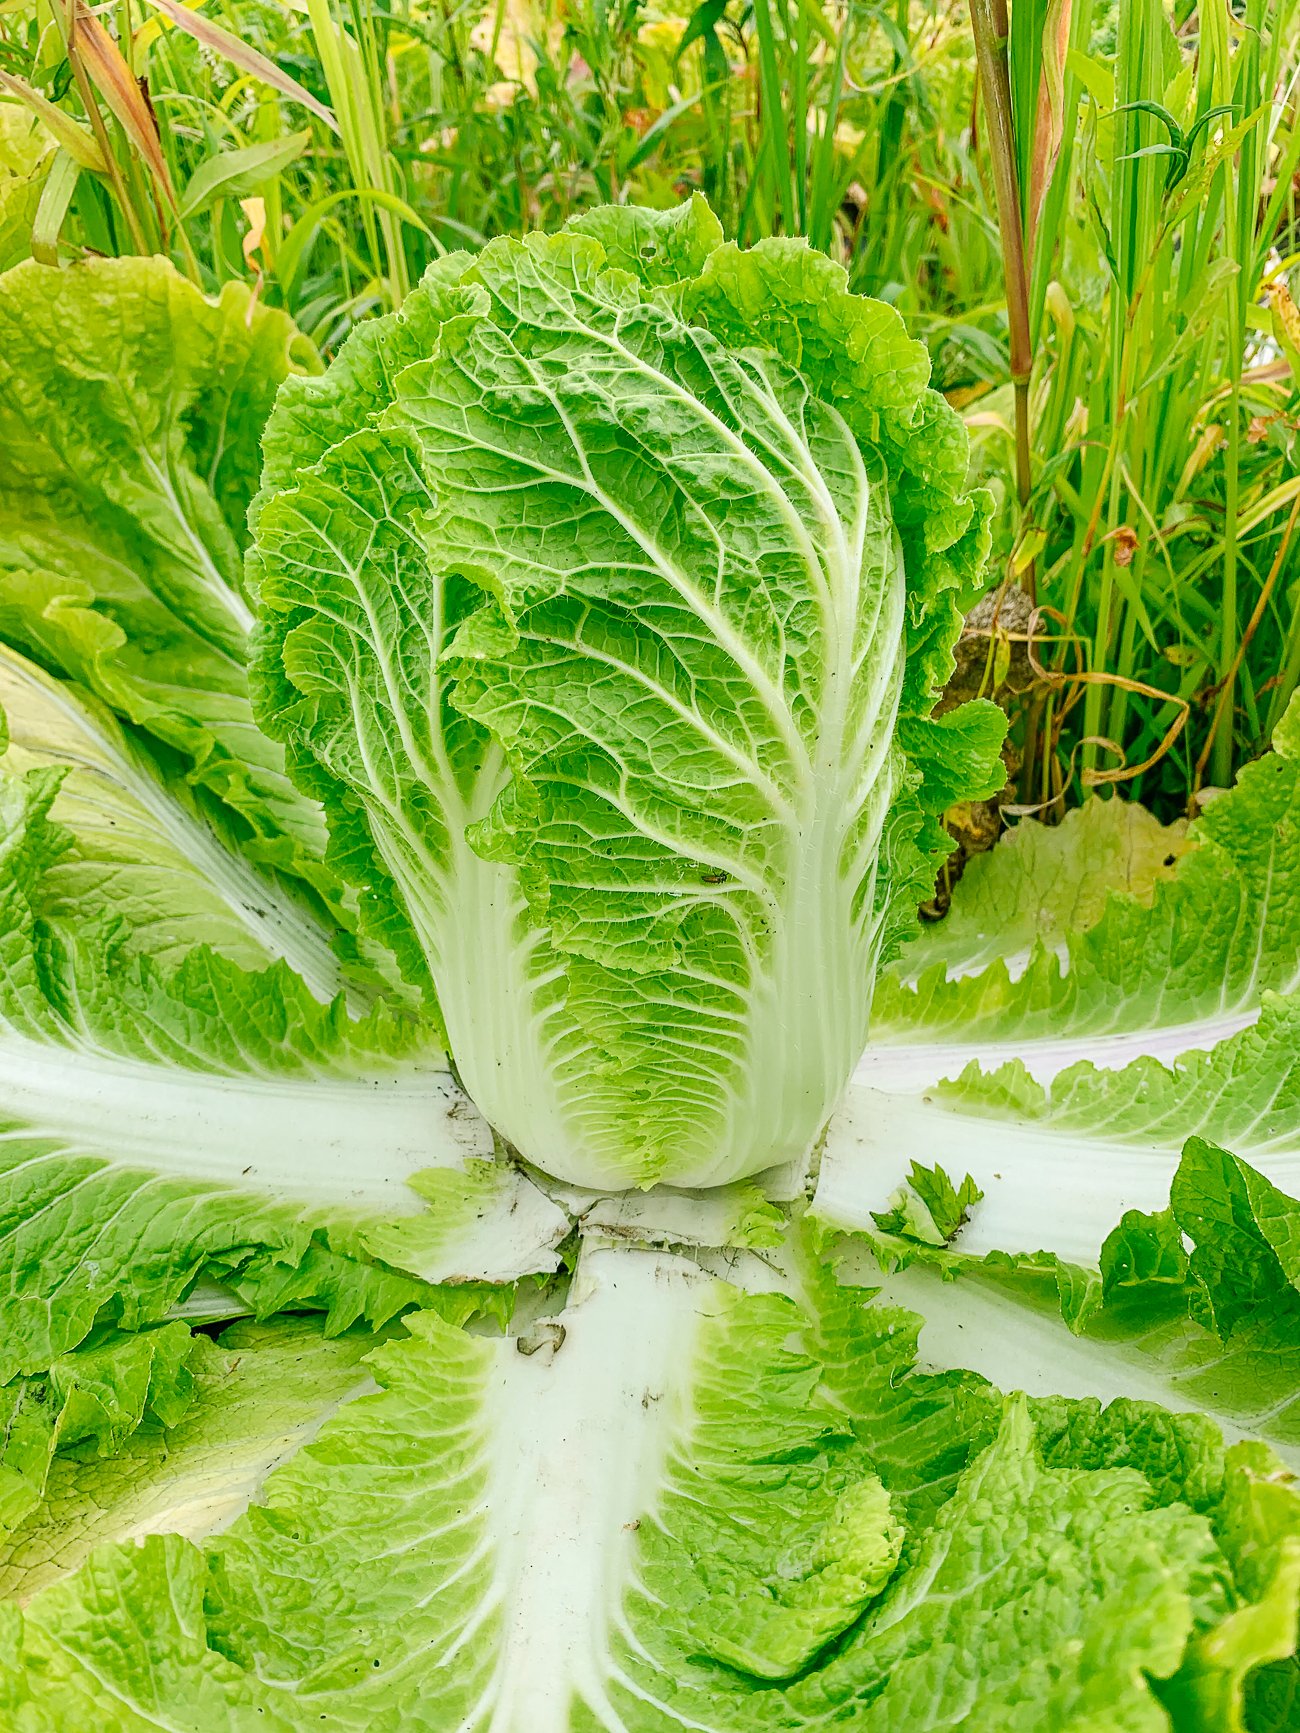 napa cabbage ready for harvest